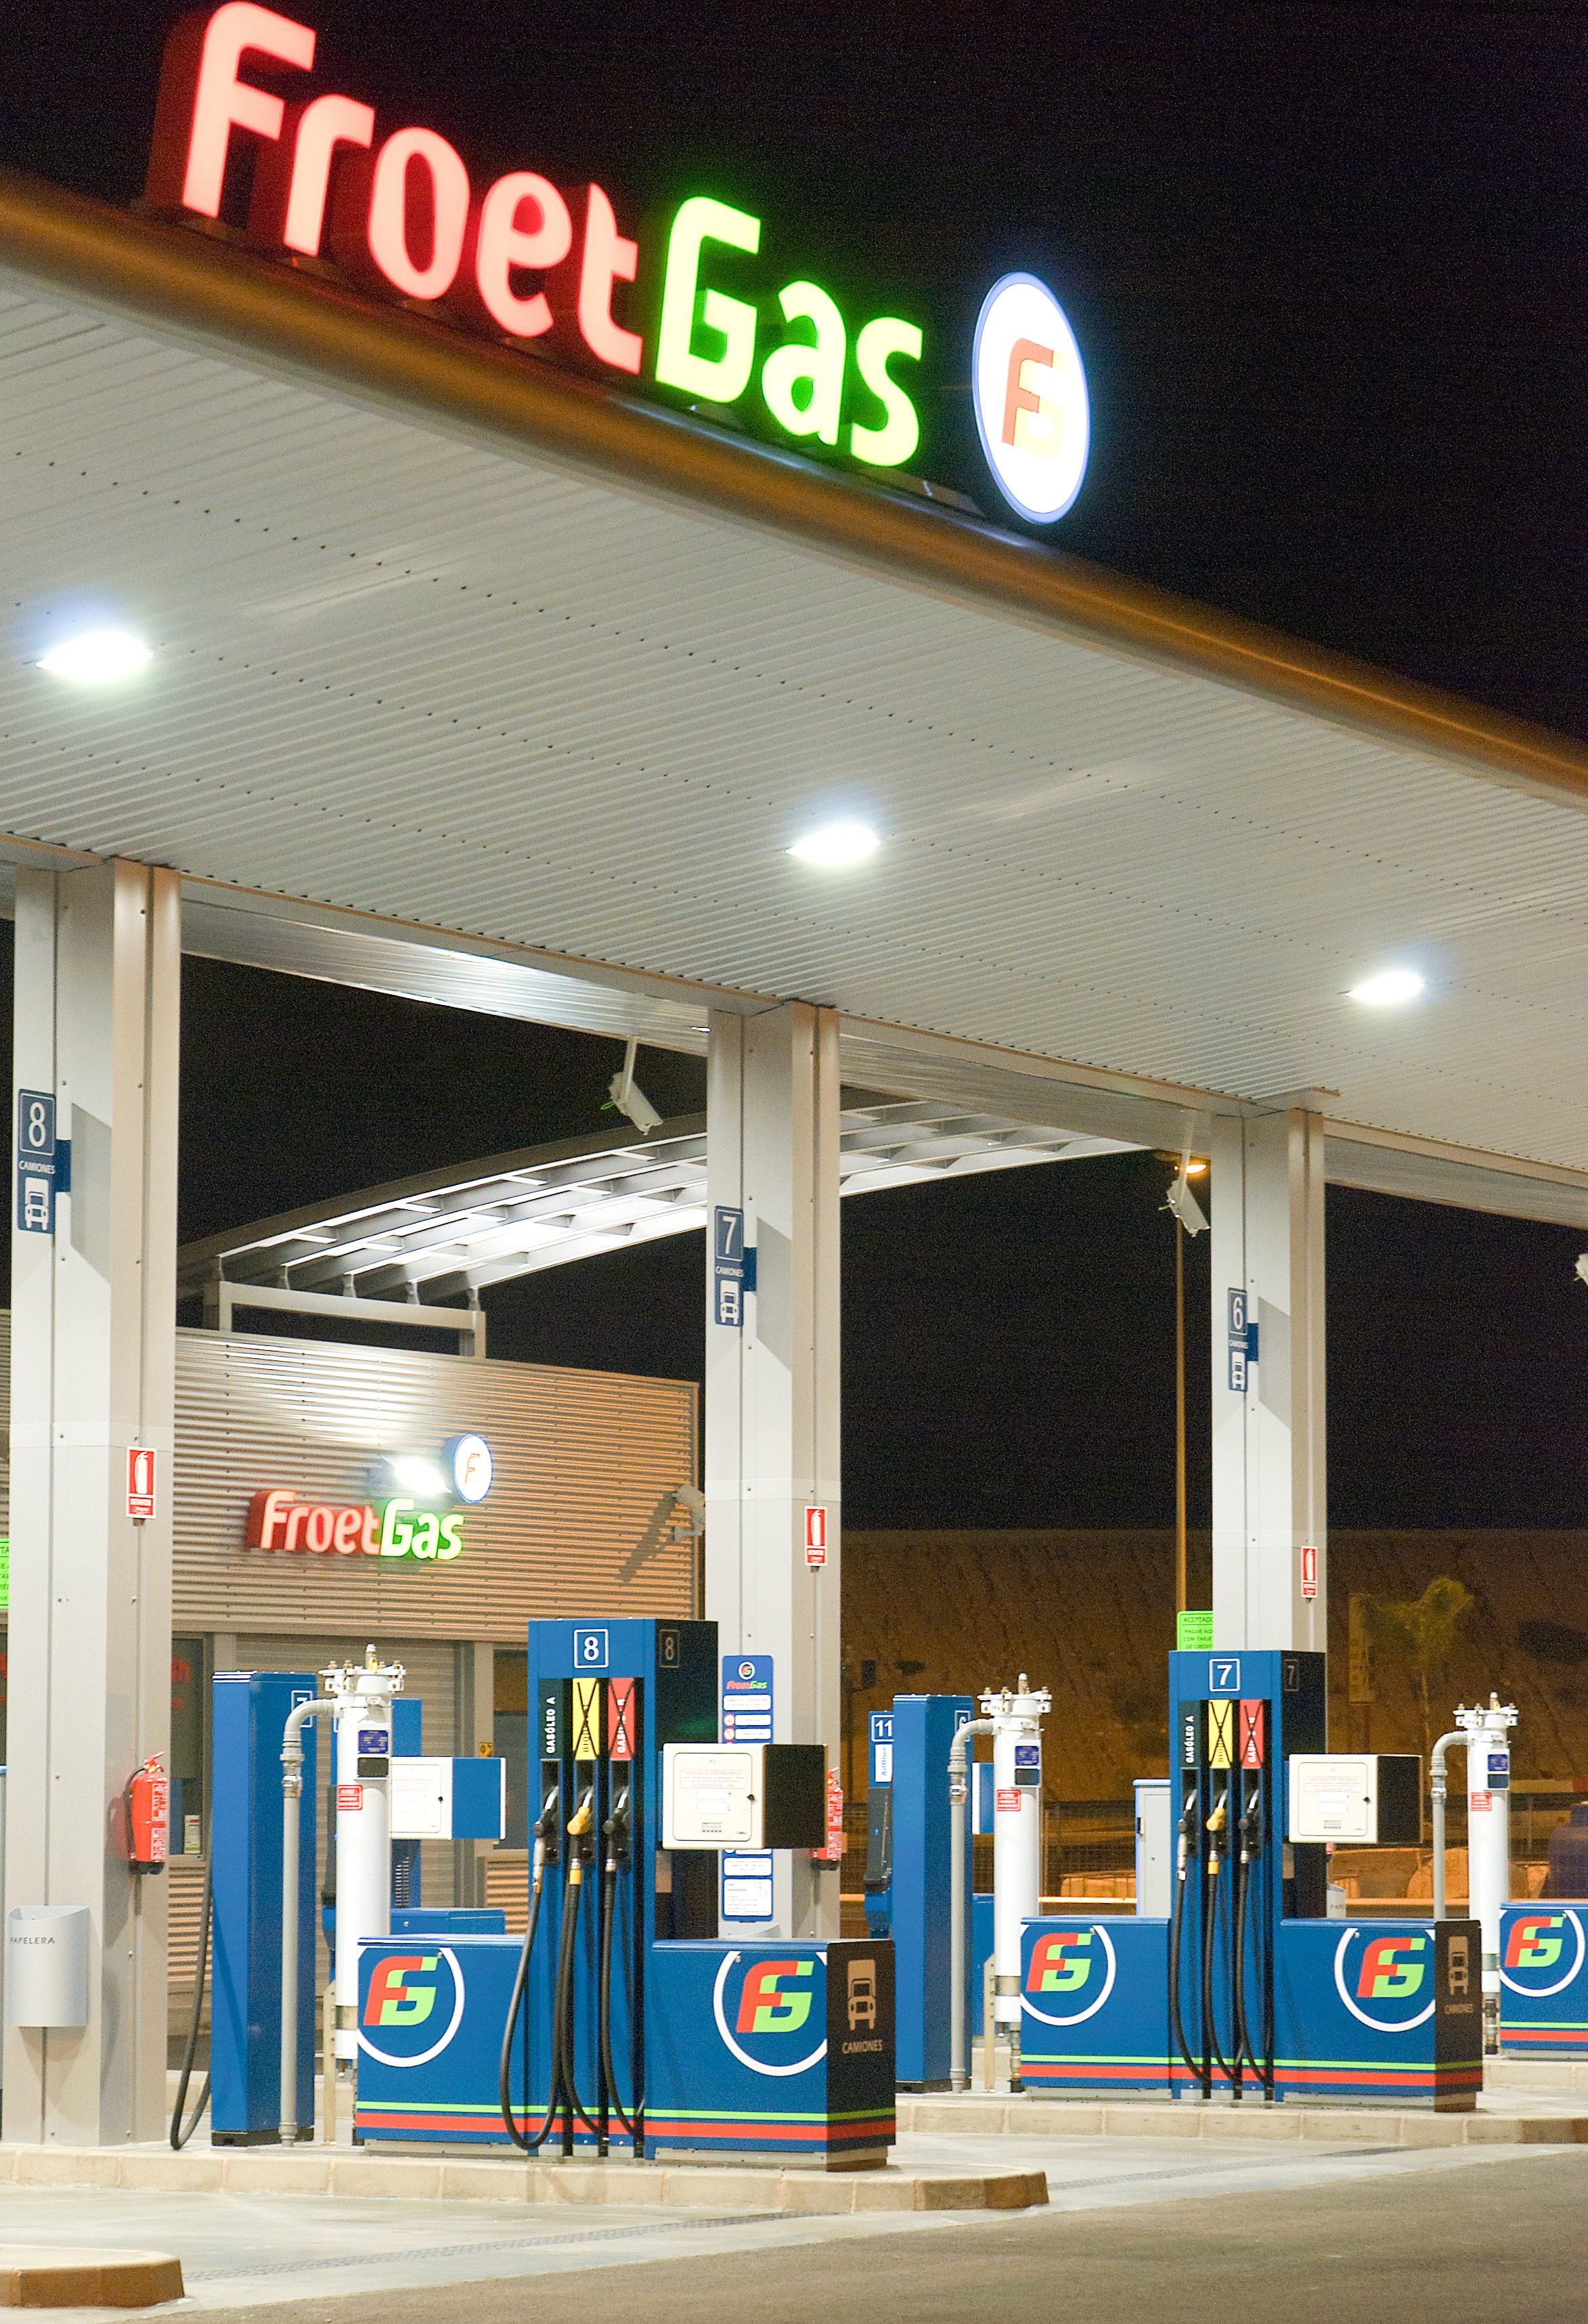 Free Image, building, professional, signage, petrol station, interior design, gasoline, retail, discount, filling station, outlet store, froet gas 2346x3434